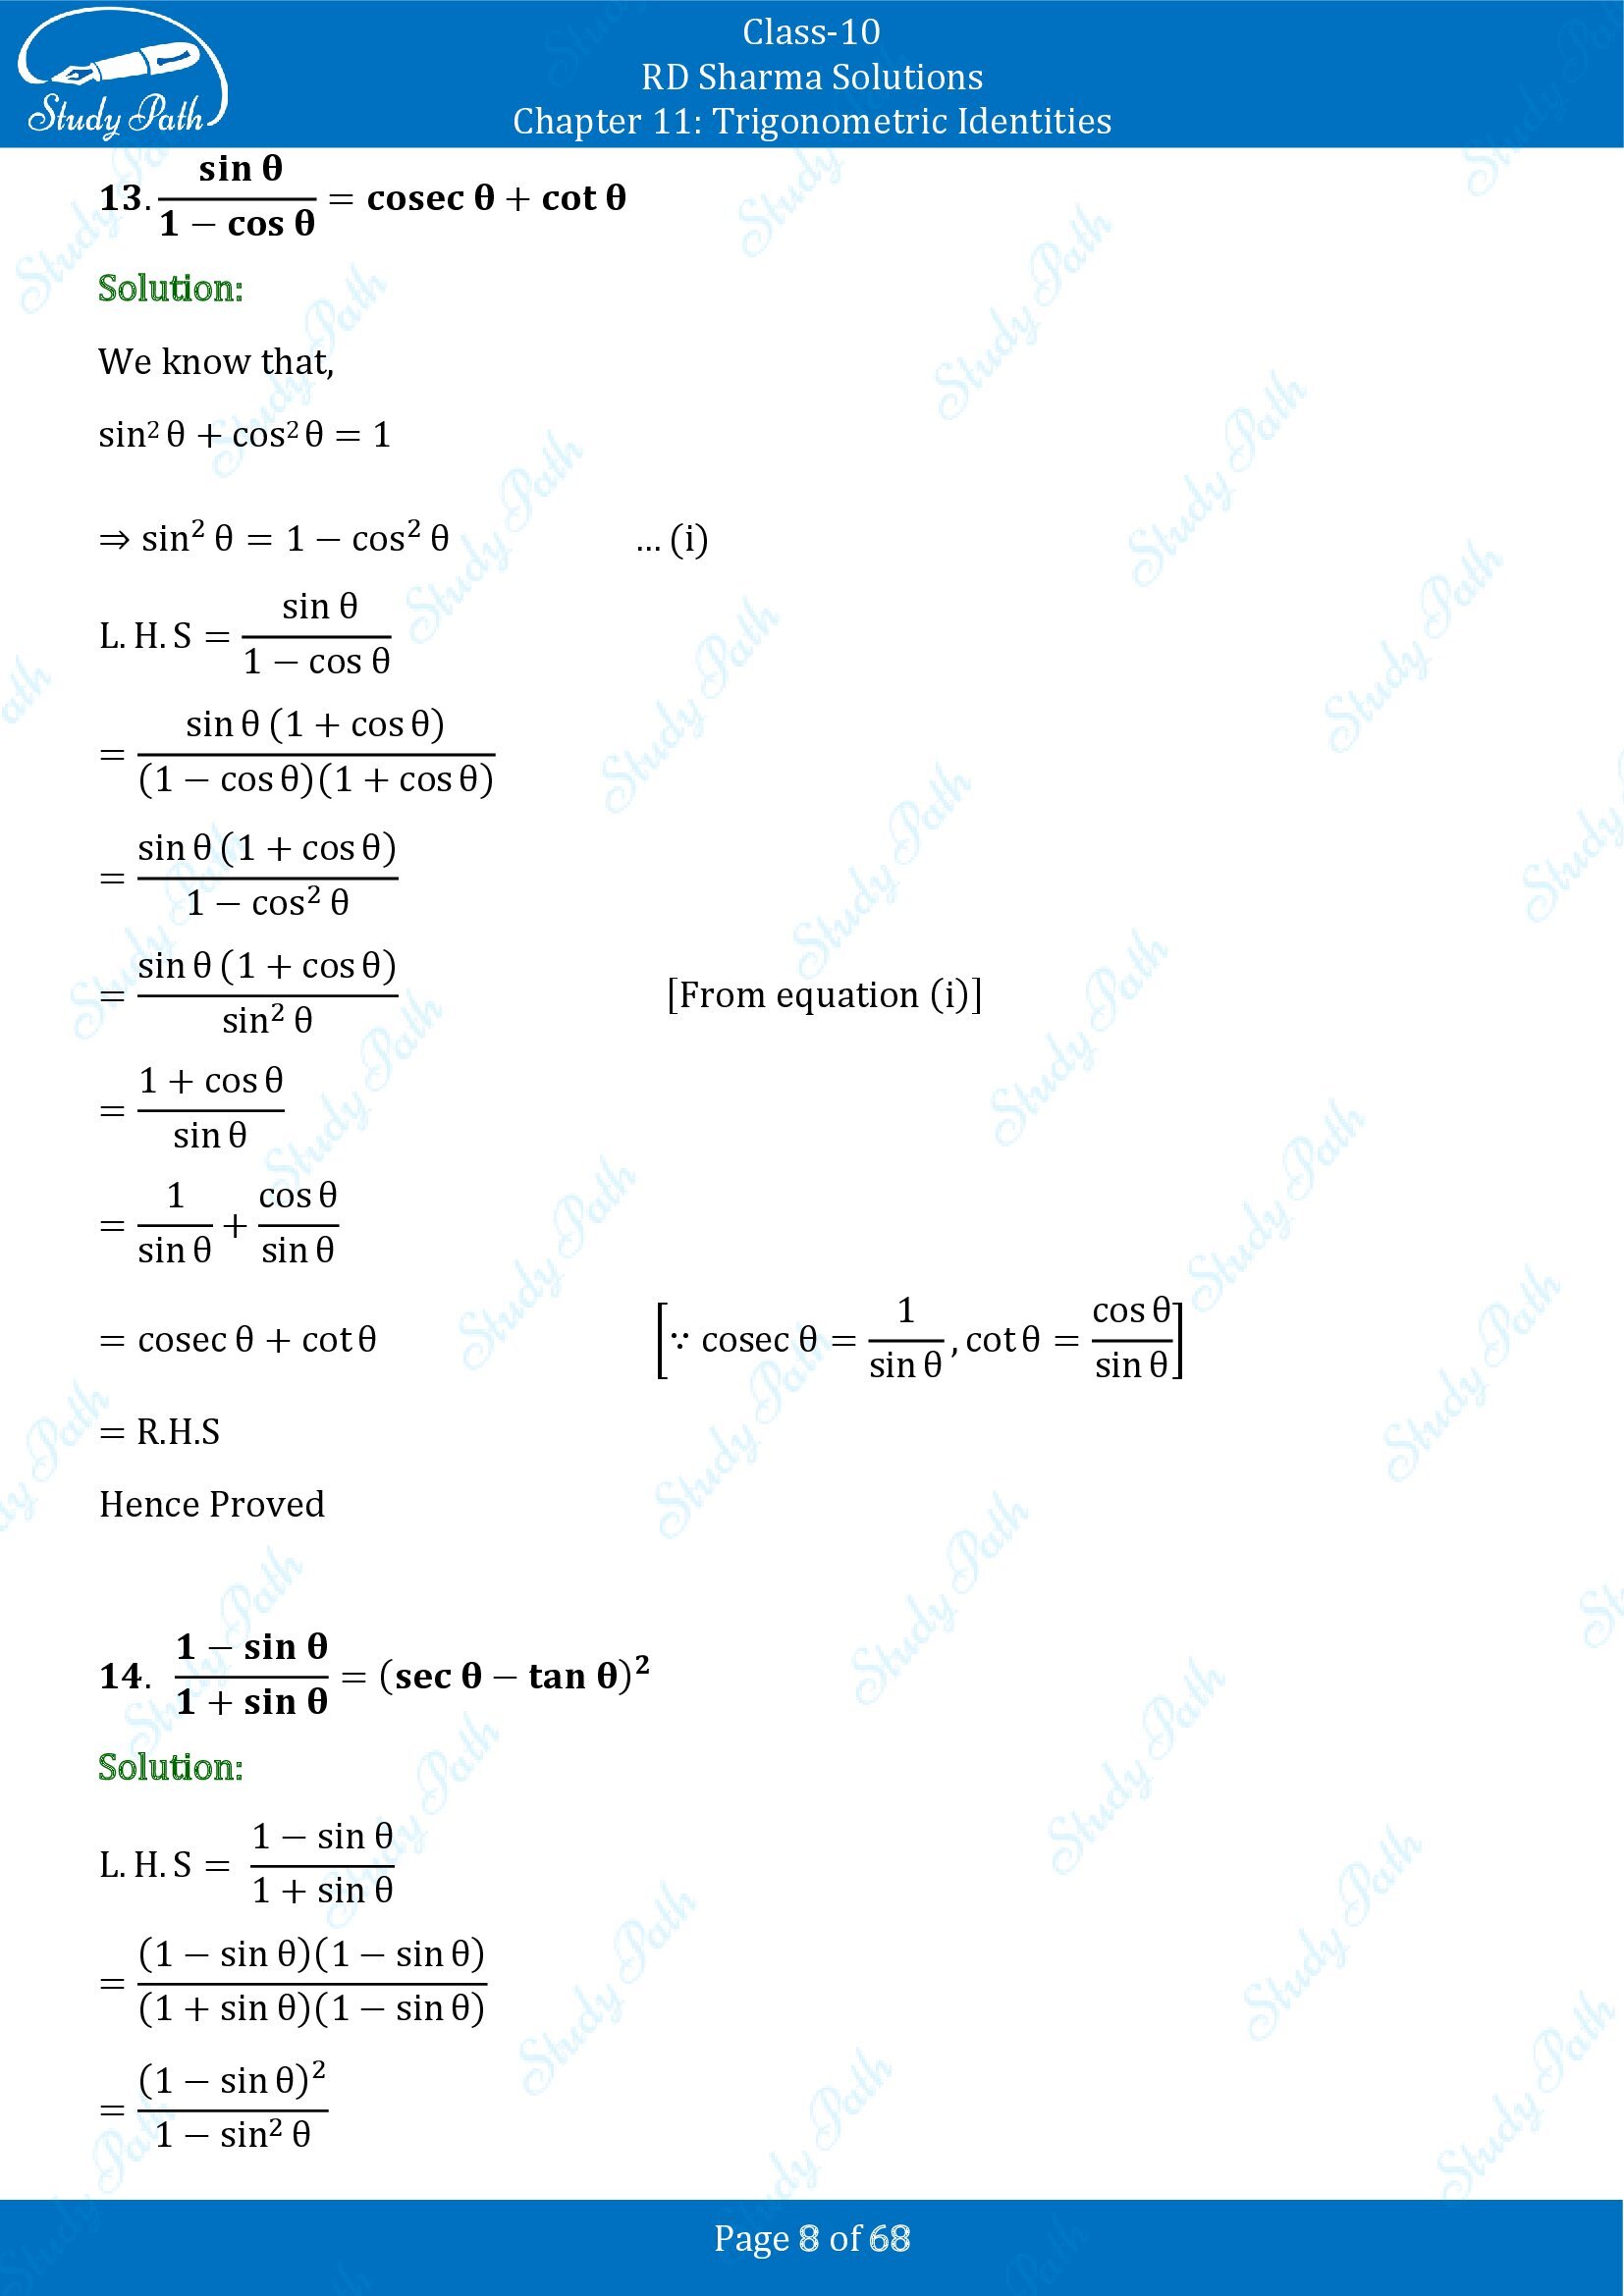 RD Sharma Solutions Class 10 Chapter 11 Trigonometric Identities Exercise 11.1 00008